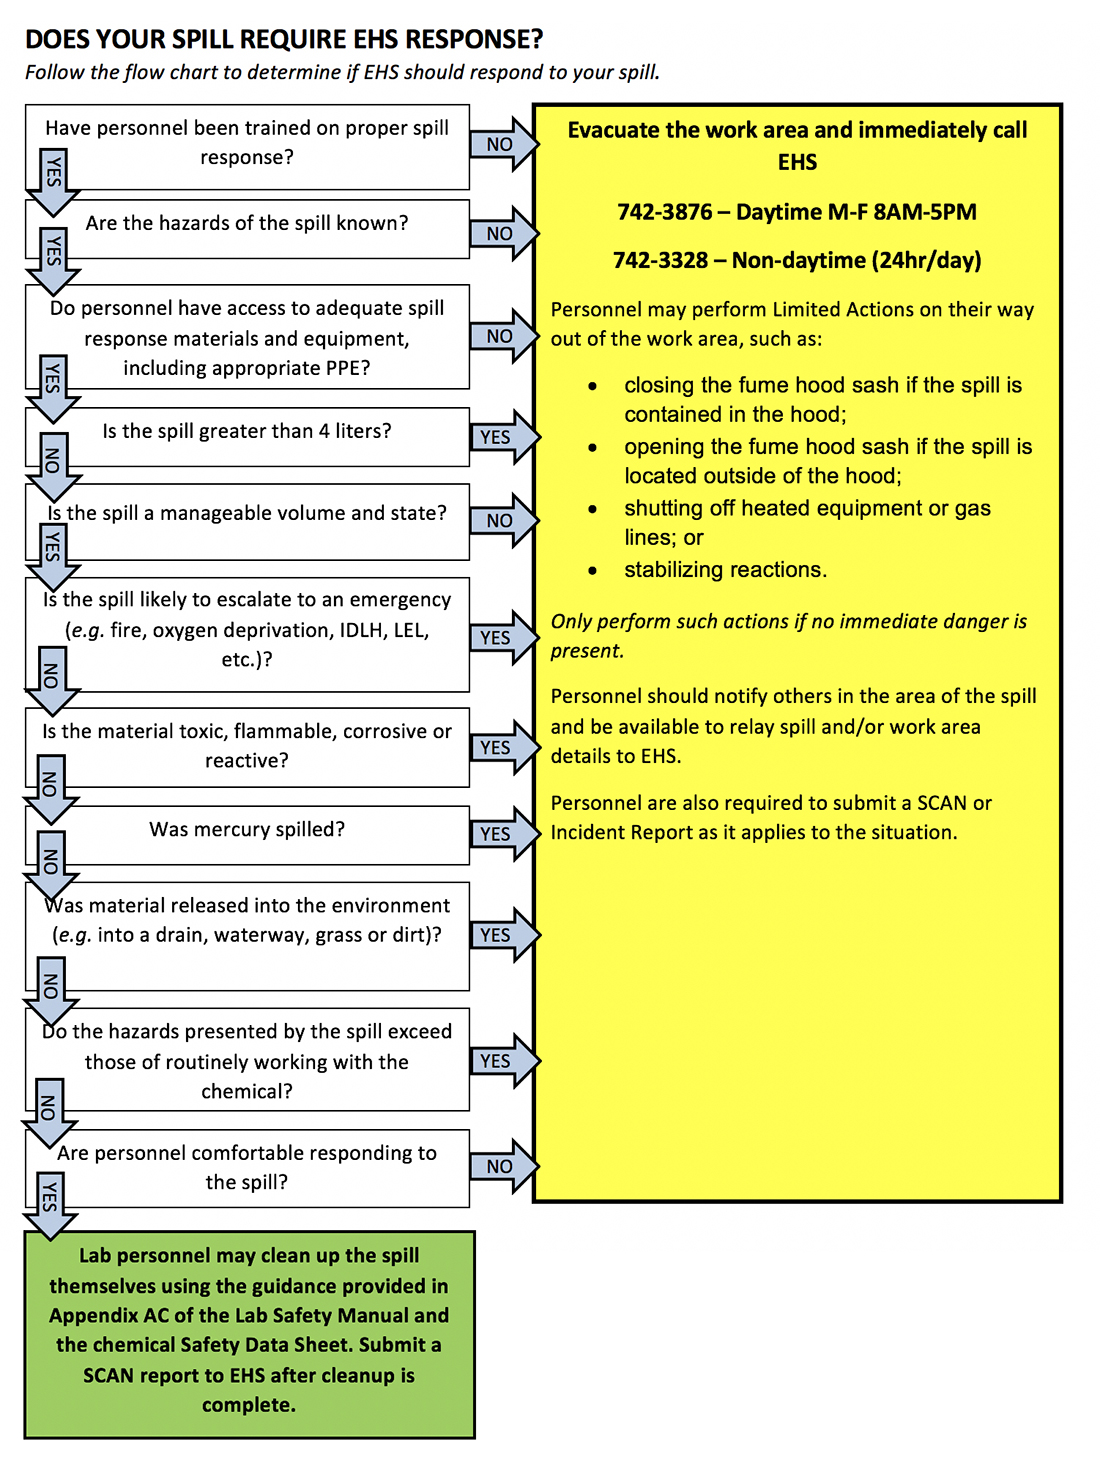 flow chart. see word document for accessible version